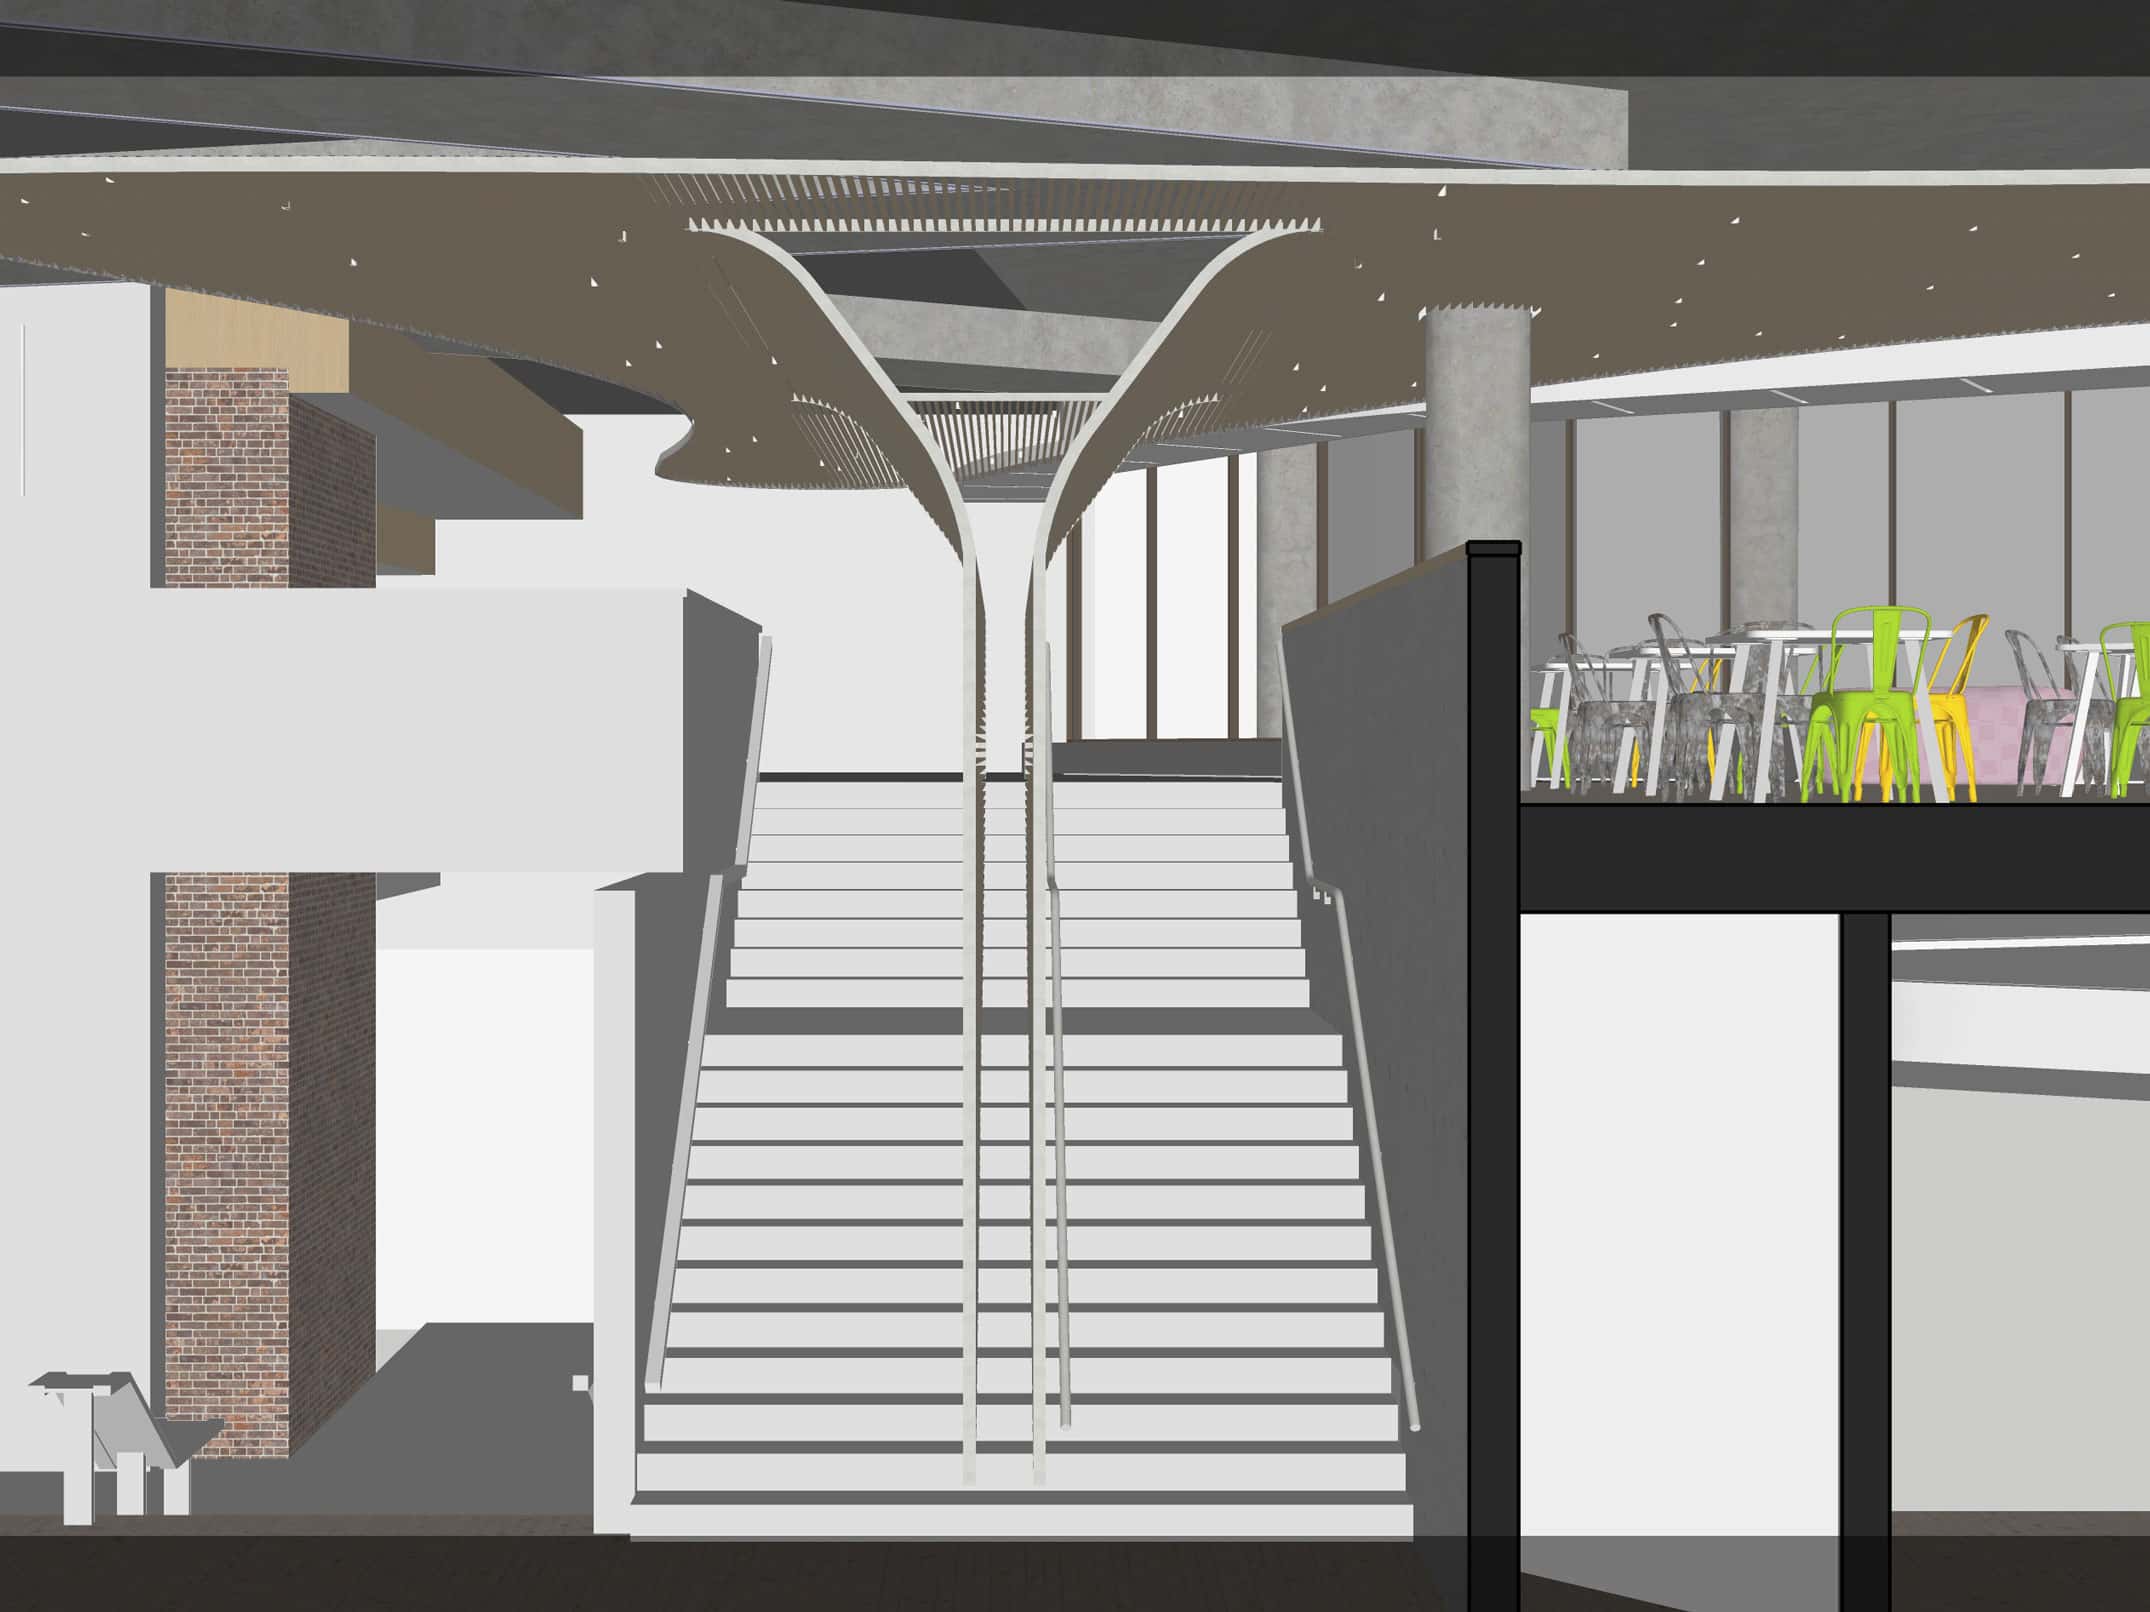 An artist's illustration shows a wide staircase leading up to a cafeteria area.